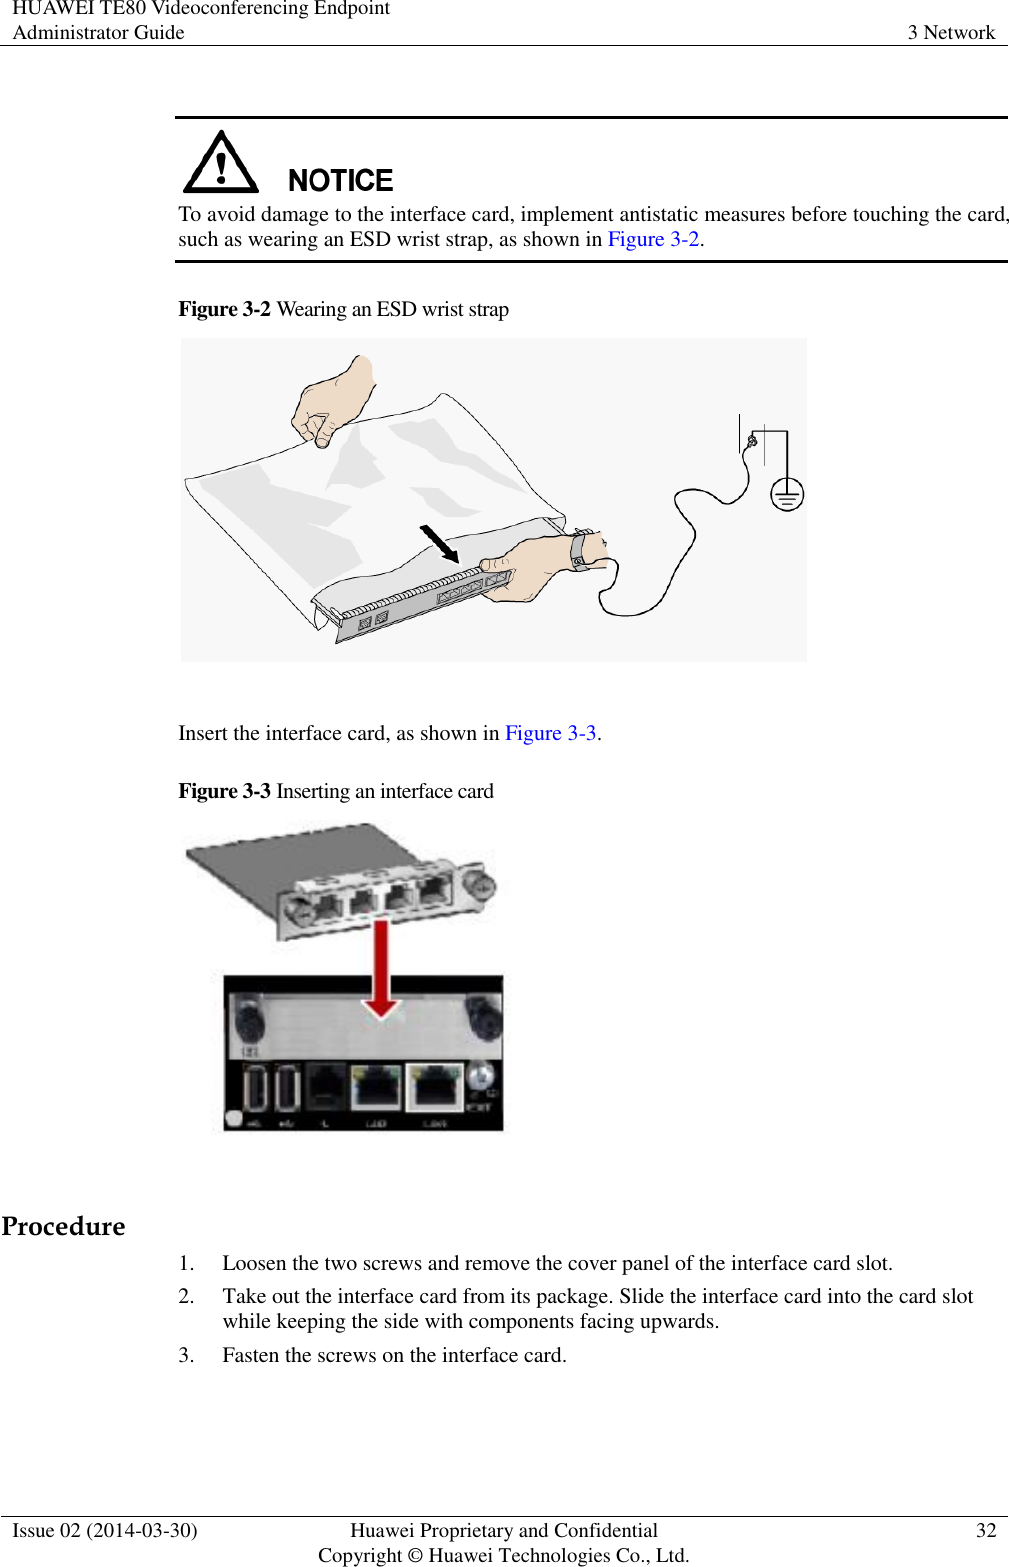 HUAWEI TE80 Videoconferencing Endpoint Administrator Guide 3 Network  Issue 02 (2014-03-30) Huawei Proprietary and Confidential Copyright © Huawei Technologies Co., Ltd. 32    To avoid damage to the interface card, implement antistatic measures before touching the card, such as wearing an ESD wrist strap, as shown in Figure 3-2. Figure 3-2 Wearing an ESD wrist strap   Insert the interface card, as shown in Figure 3-3. Figure 3-3 Inserting an interface card   Procedure 1. Loosen the two screws and remove the cover panel of the interface card slot. 2. Take out the interface card from its package. Slide the interface card into the card slot while keeping the side with components facing upwards. 3. Fasten the screws on the interface card. 